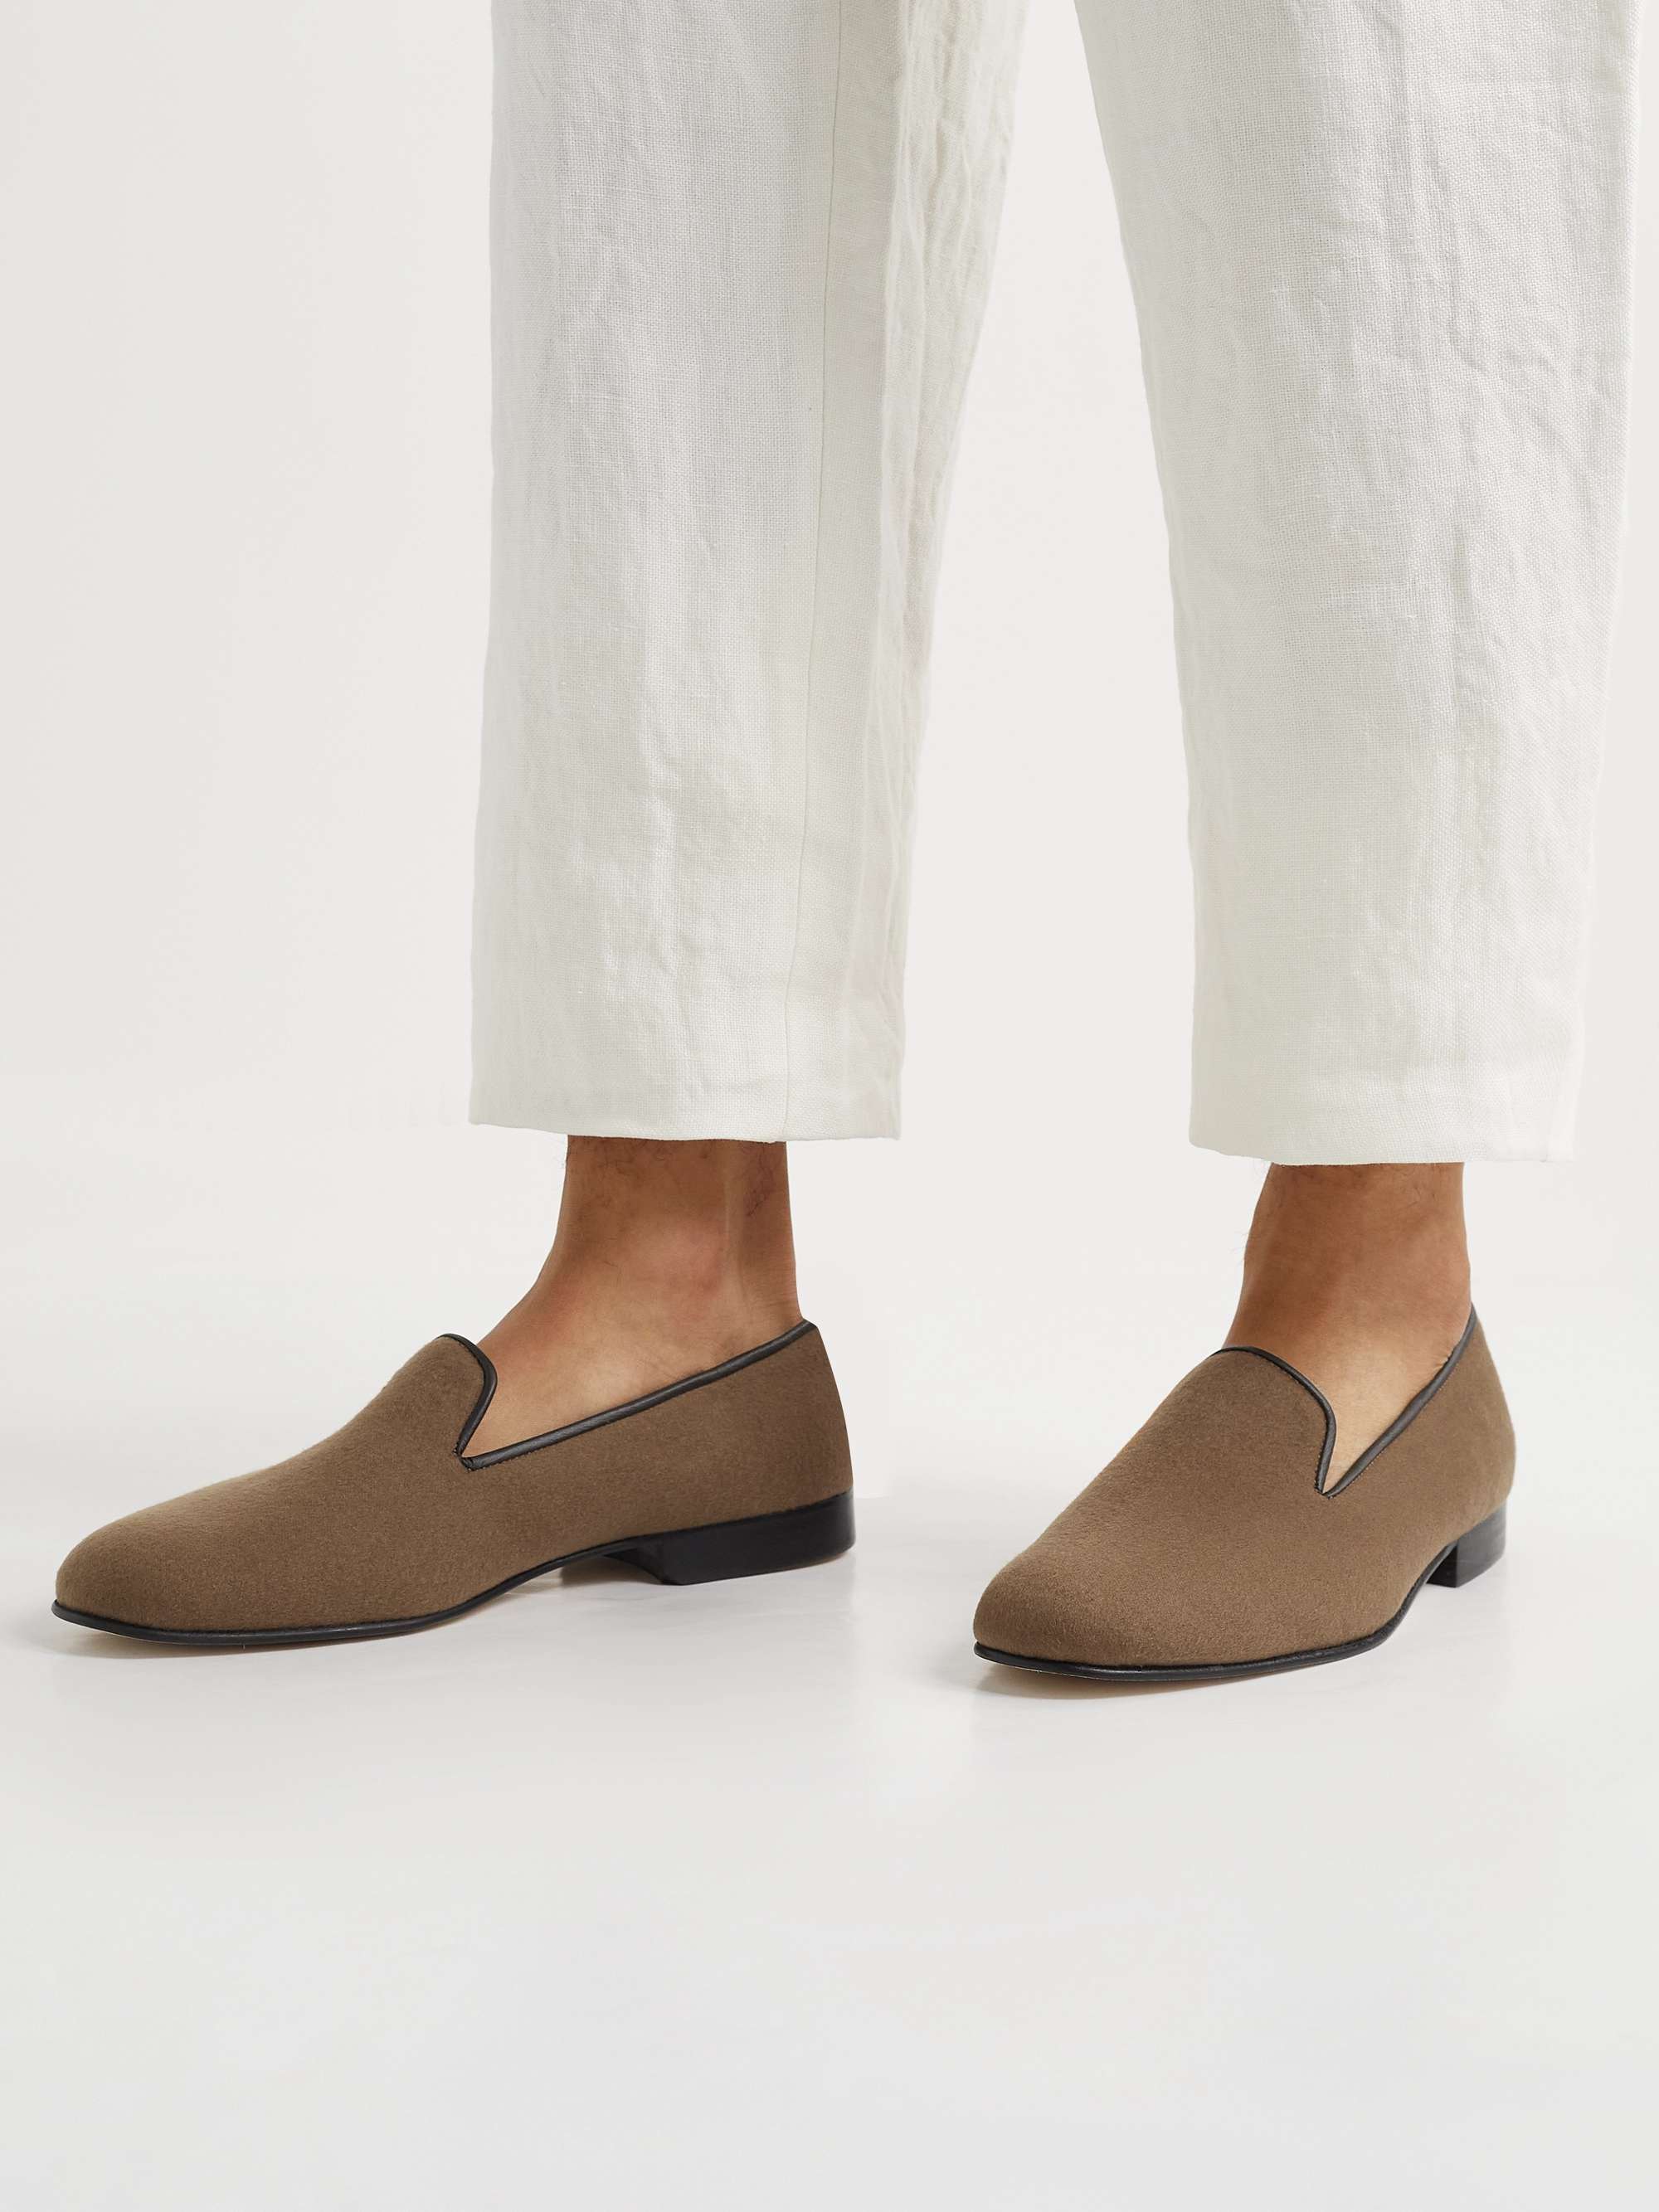 GEORGE CLEVERLEY Albert Leather-Trimmed Cashmere Loafers